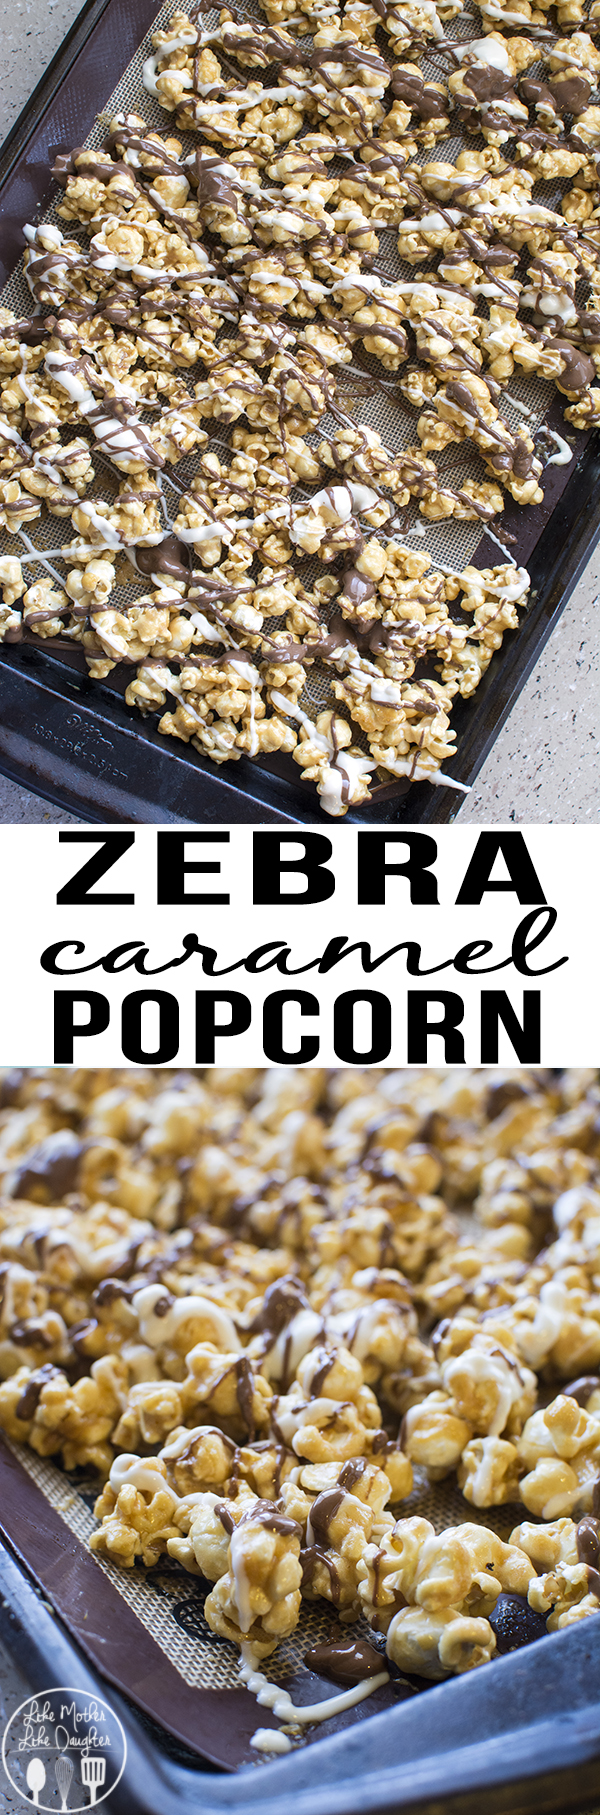 Title card for zebra caramel popcorn with text.